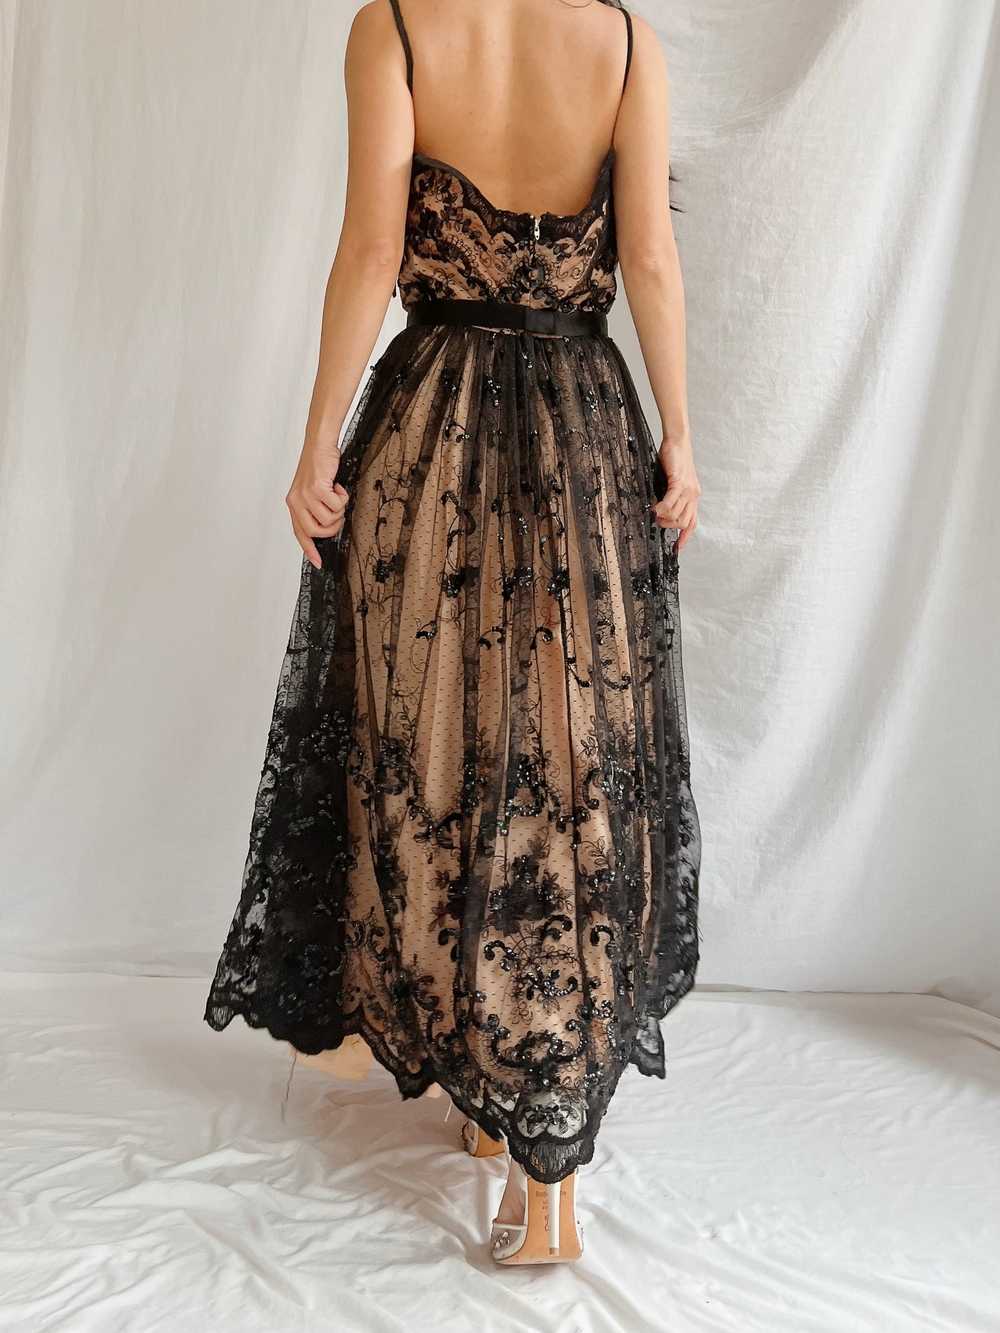 Vintage Nude and Black Lace Dress - S - image 3